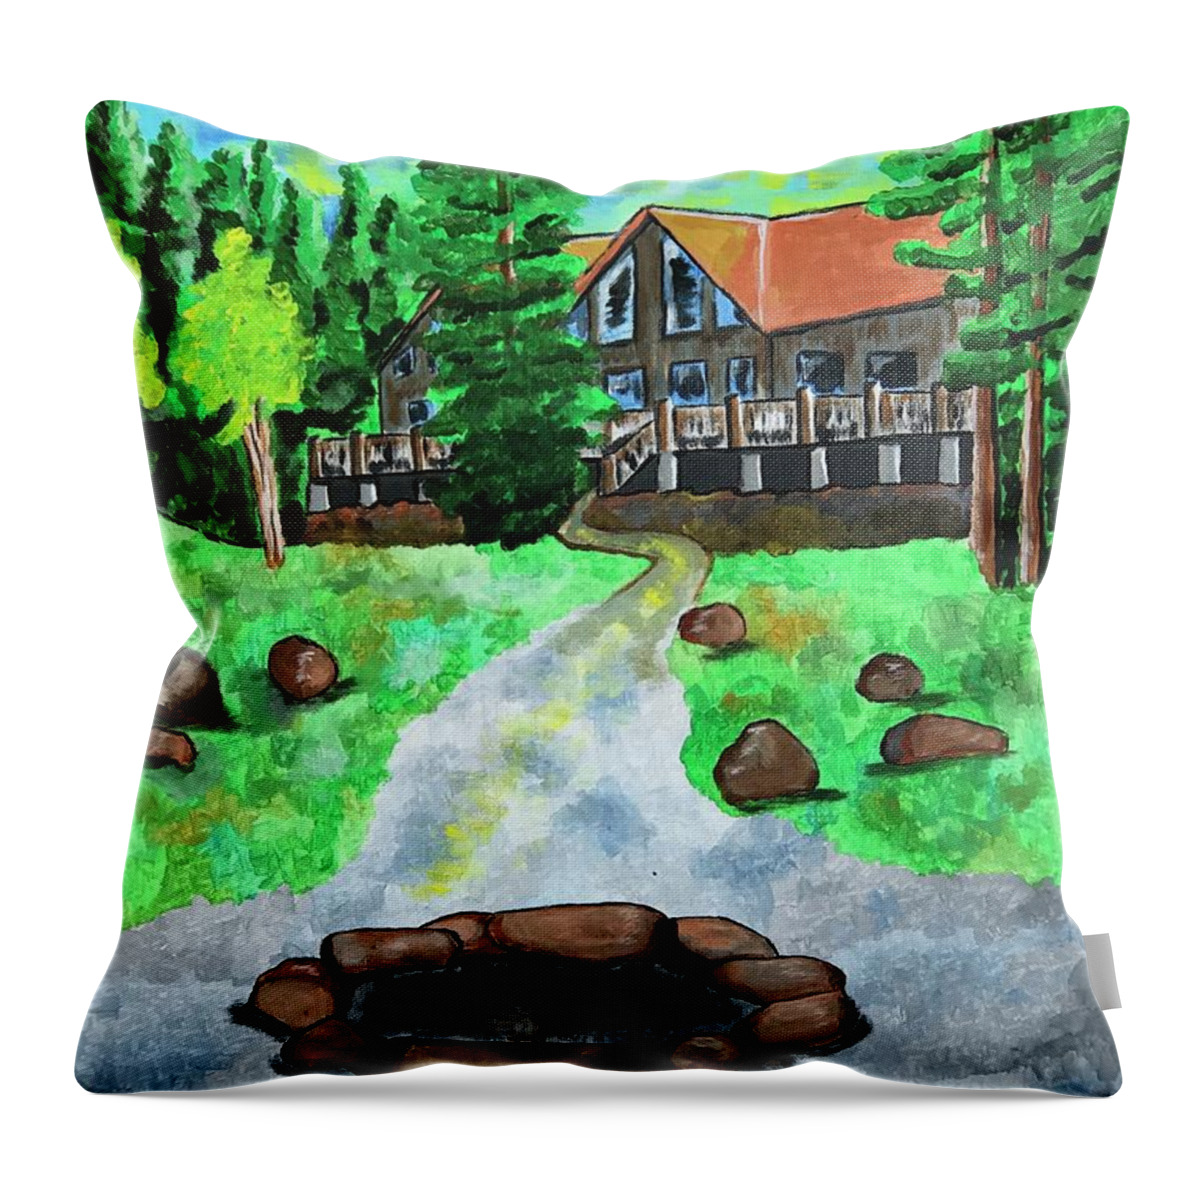  Throw Pillow featuring the painting Lakewoods Lodge by Julie K Wallace